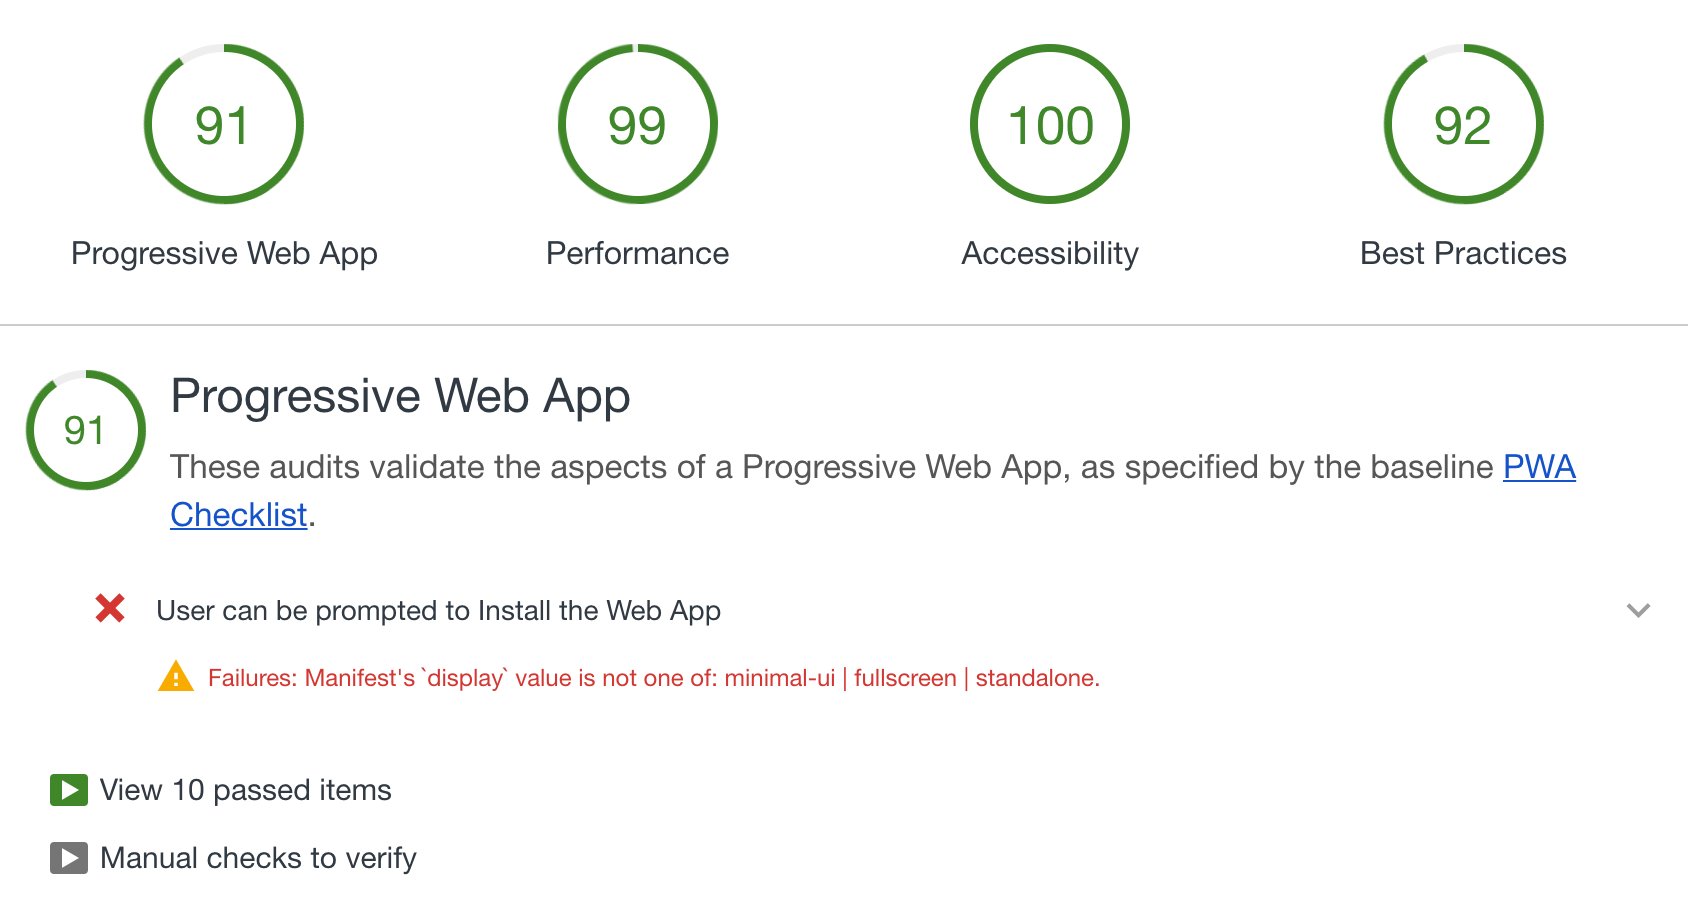 Image shows how the site scored in a lighthouse performance test. It scored 91/100 for progressive web app, 99/100 for performance, 100/100 for accessibility and 92/100 for best practices.